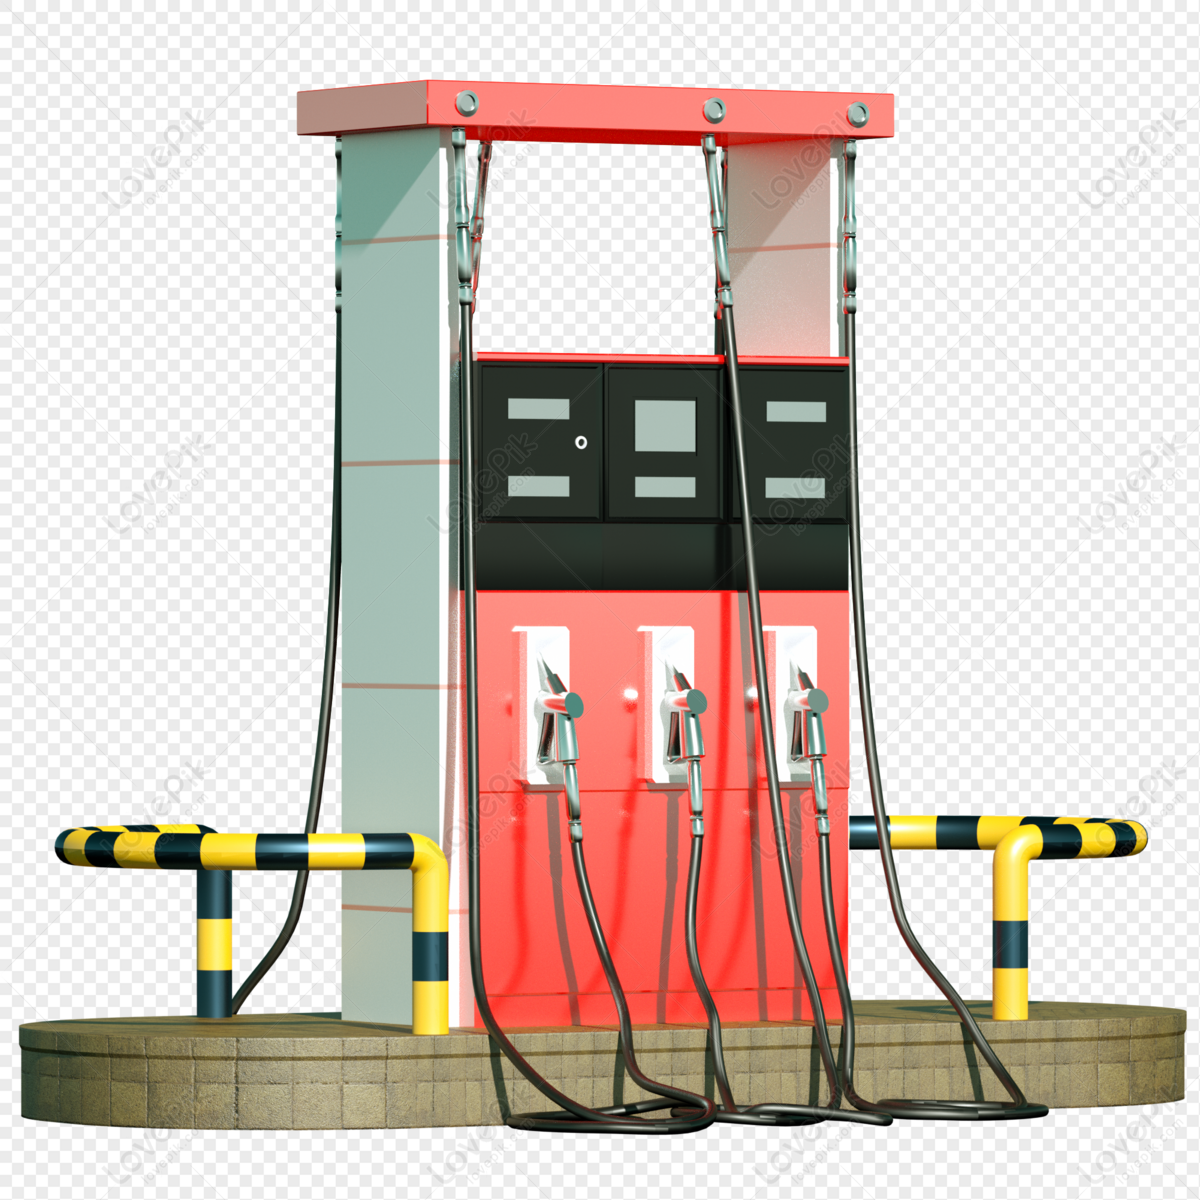 Filling Station Linear Icon Stock Vector - Illustration of linear, flat:  175562460